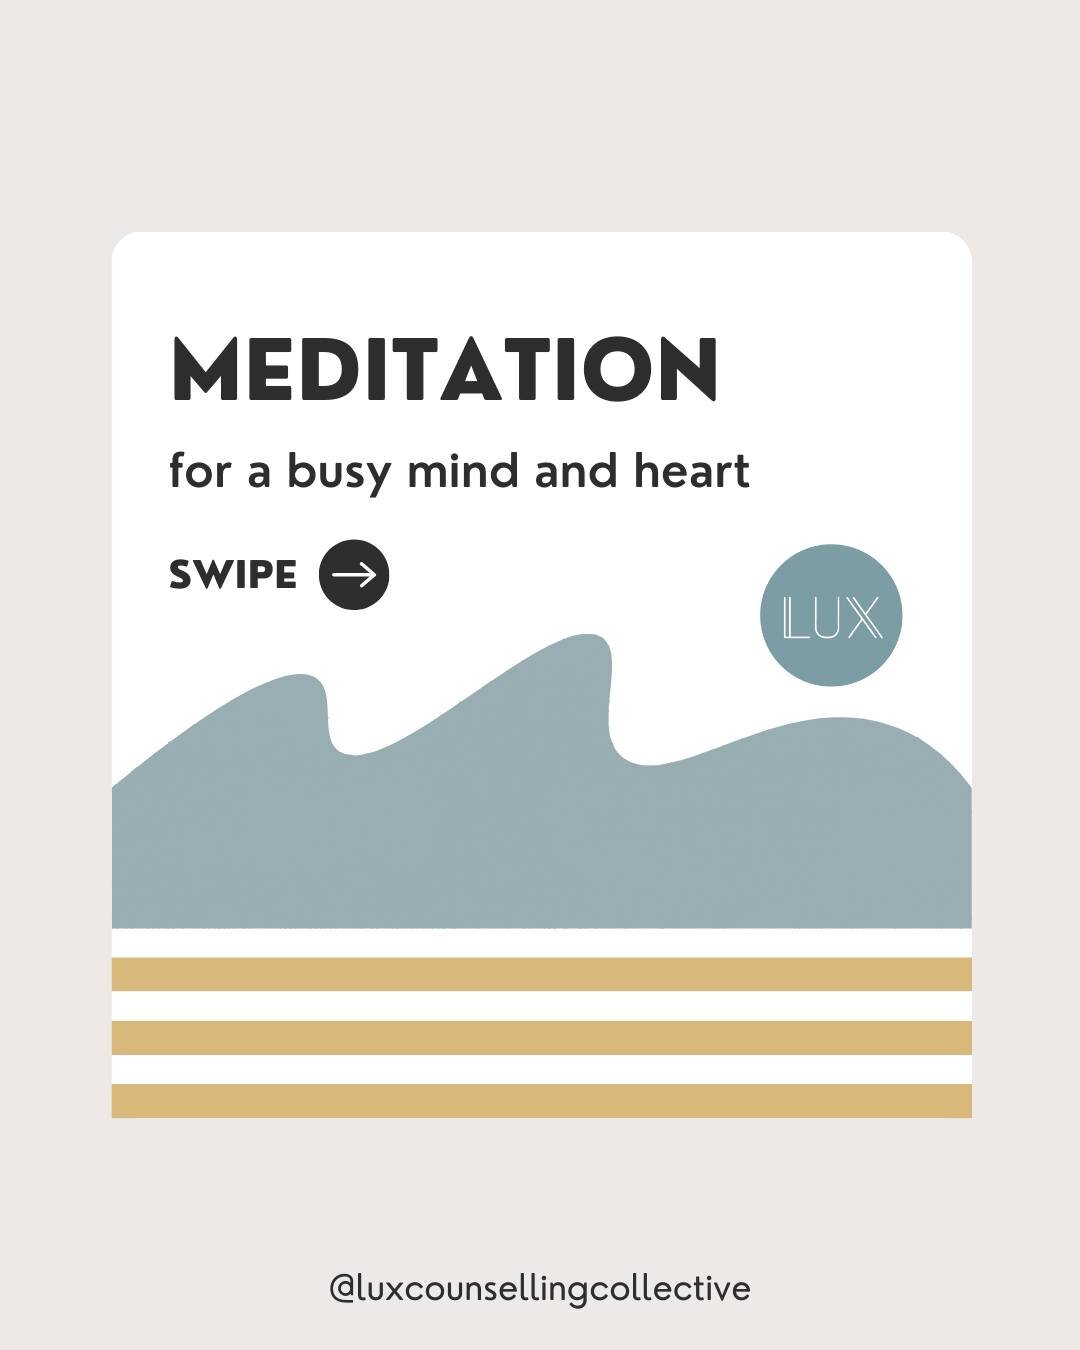 Have you incorporated meditation into your daily or weekly rhythm? Contrary to what most people think, it does not have to be difficult or time-consuming. 

Meditation can teach us to let go of our busy minds and be in our hearts and body. By opening